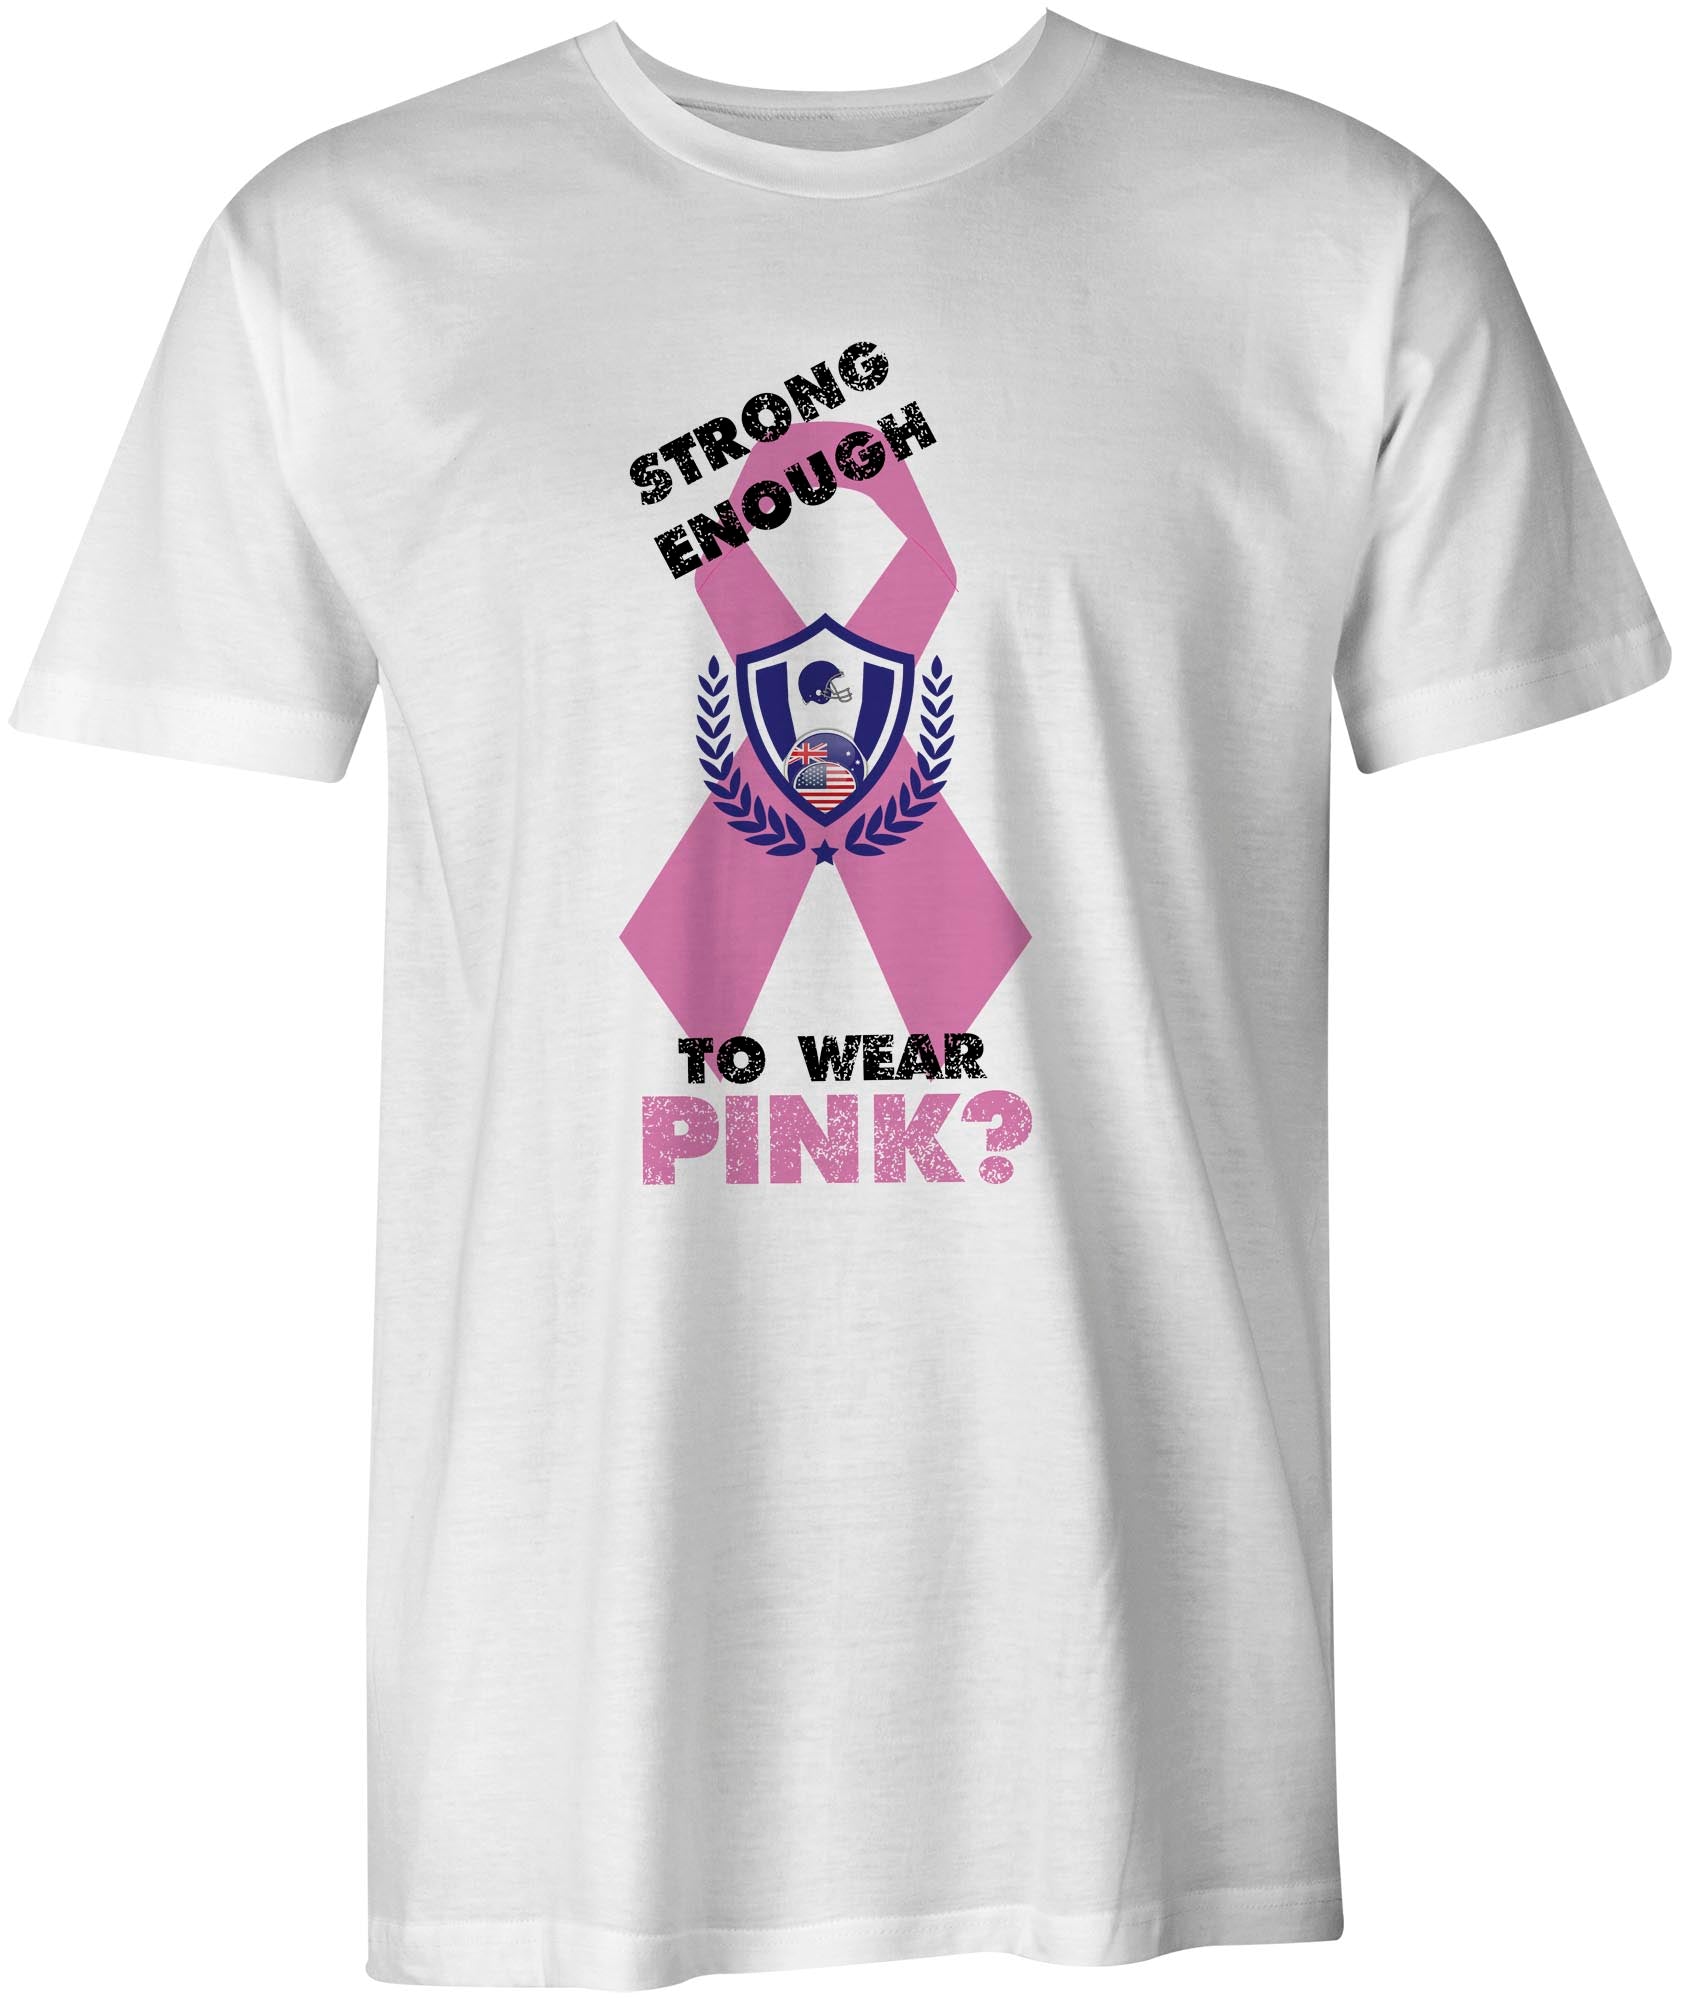 Strong Enough Breast Cancer T Shirt